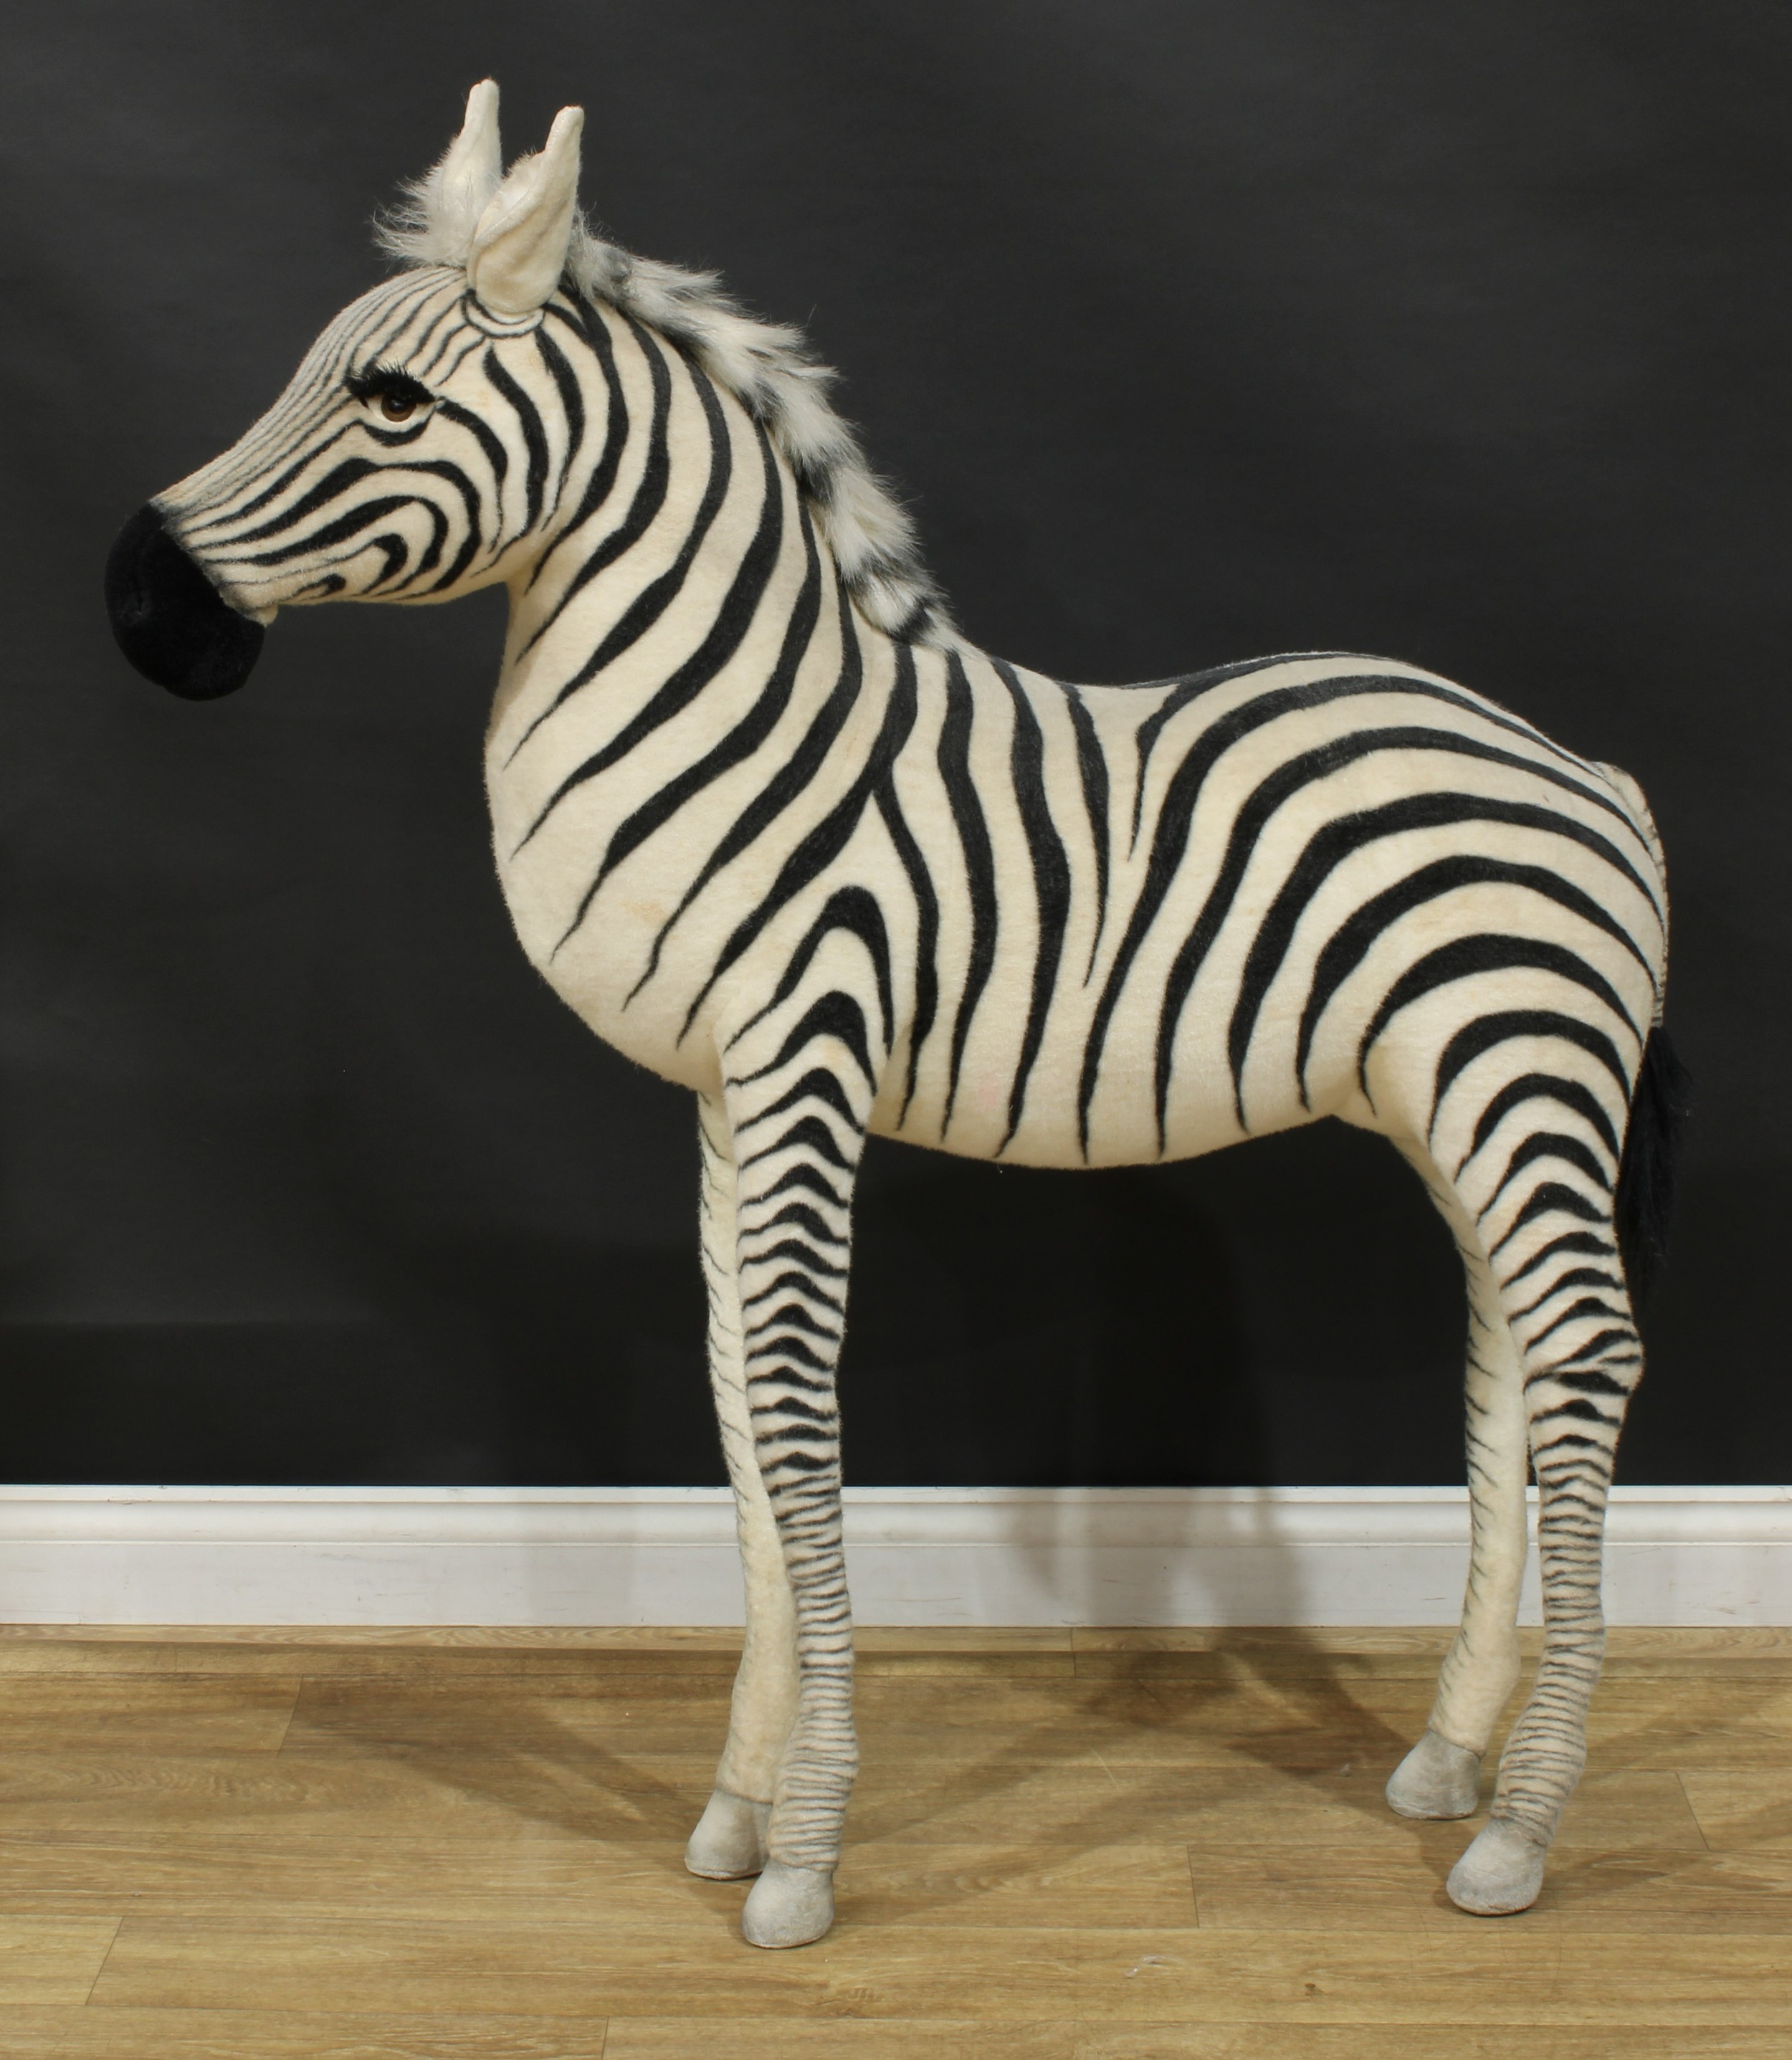 A large shop display/point of sale model of a Zebra, probably by Steiff (Germany) or similar, - Image 3 of 5